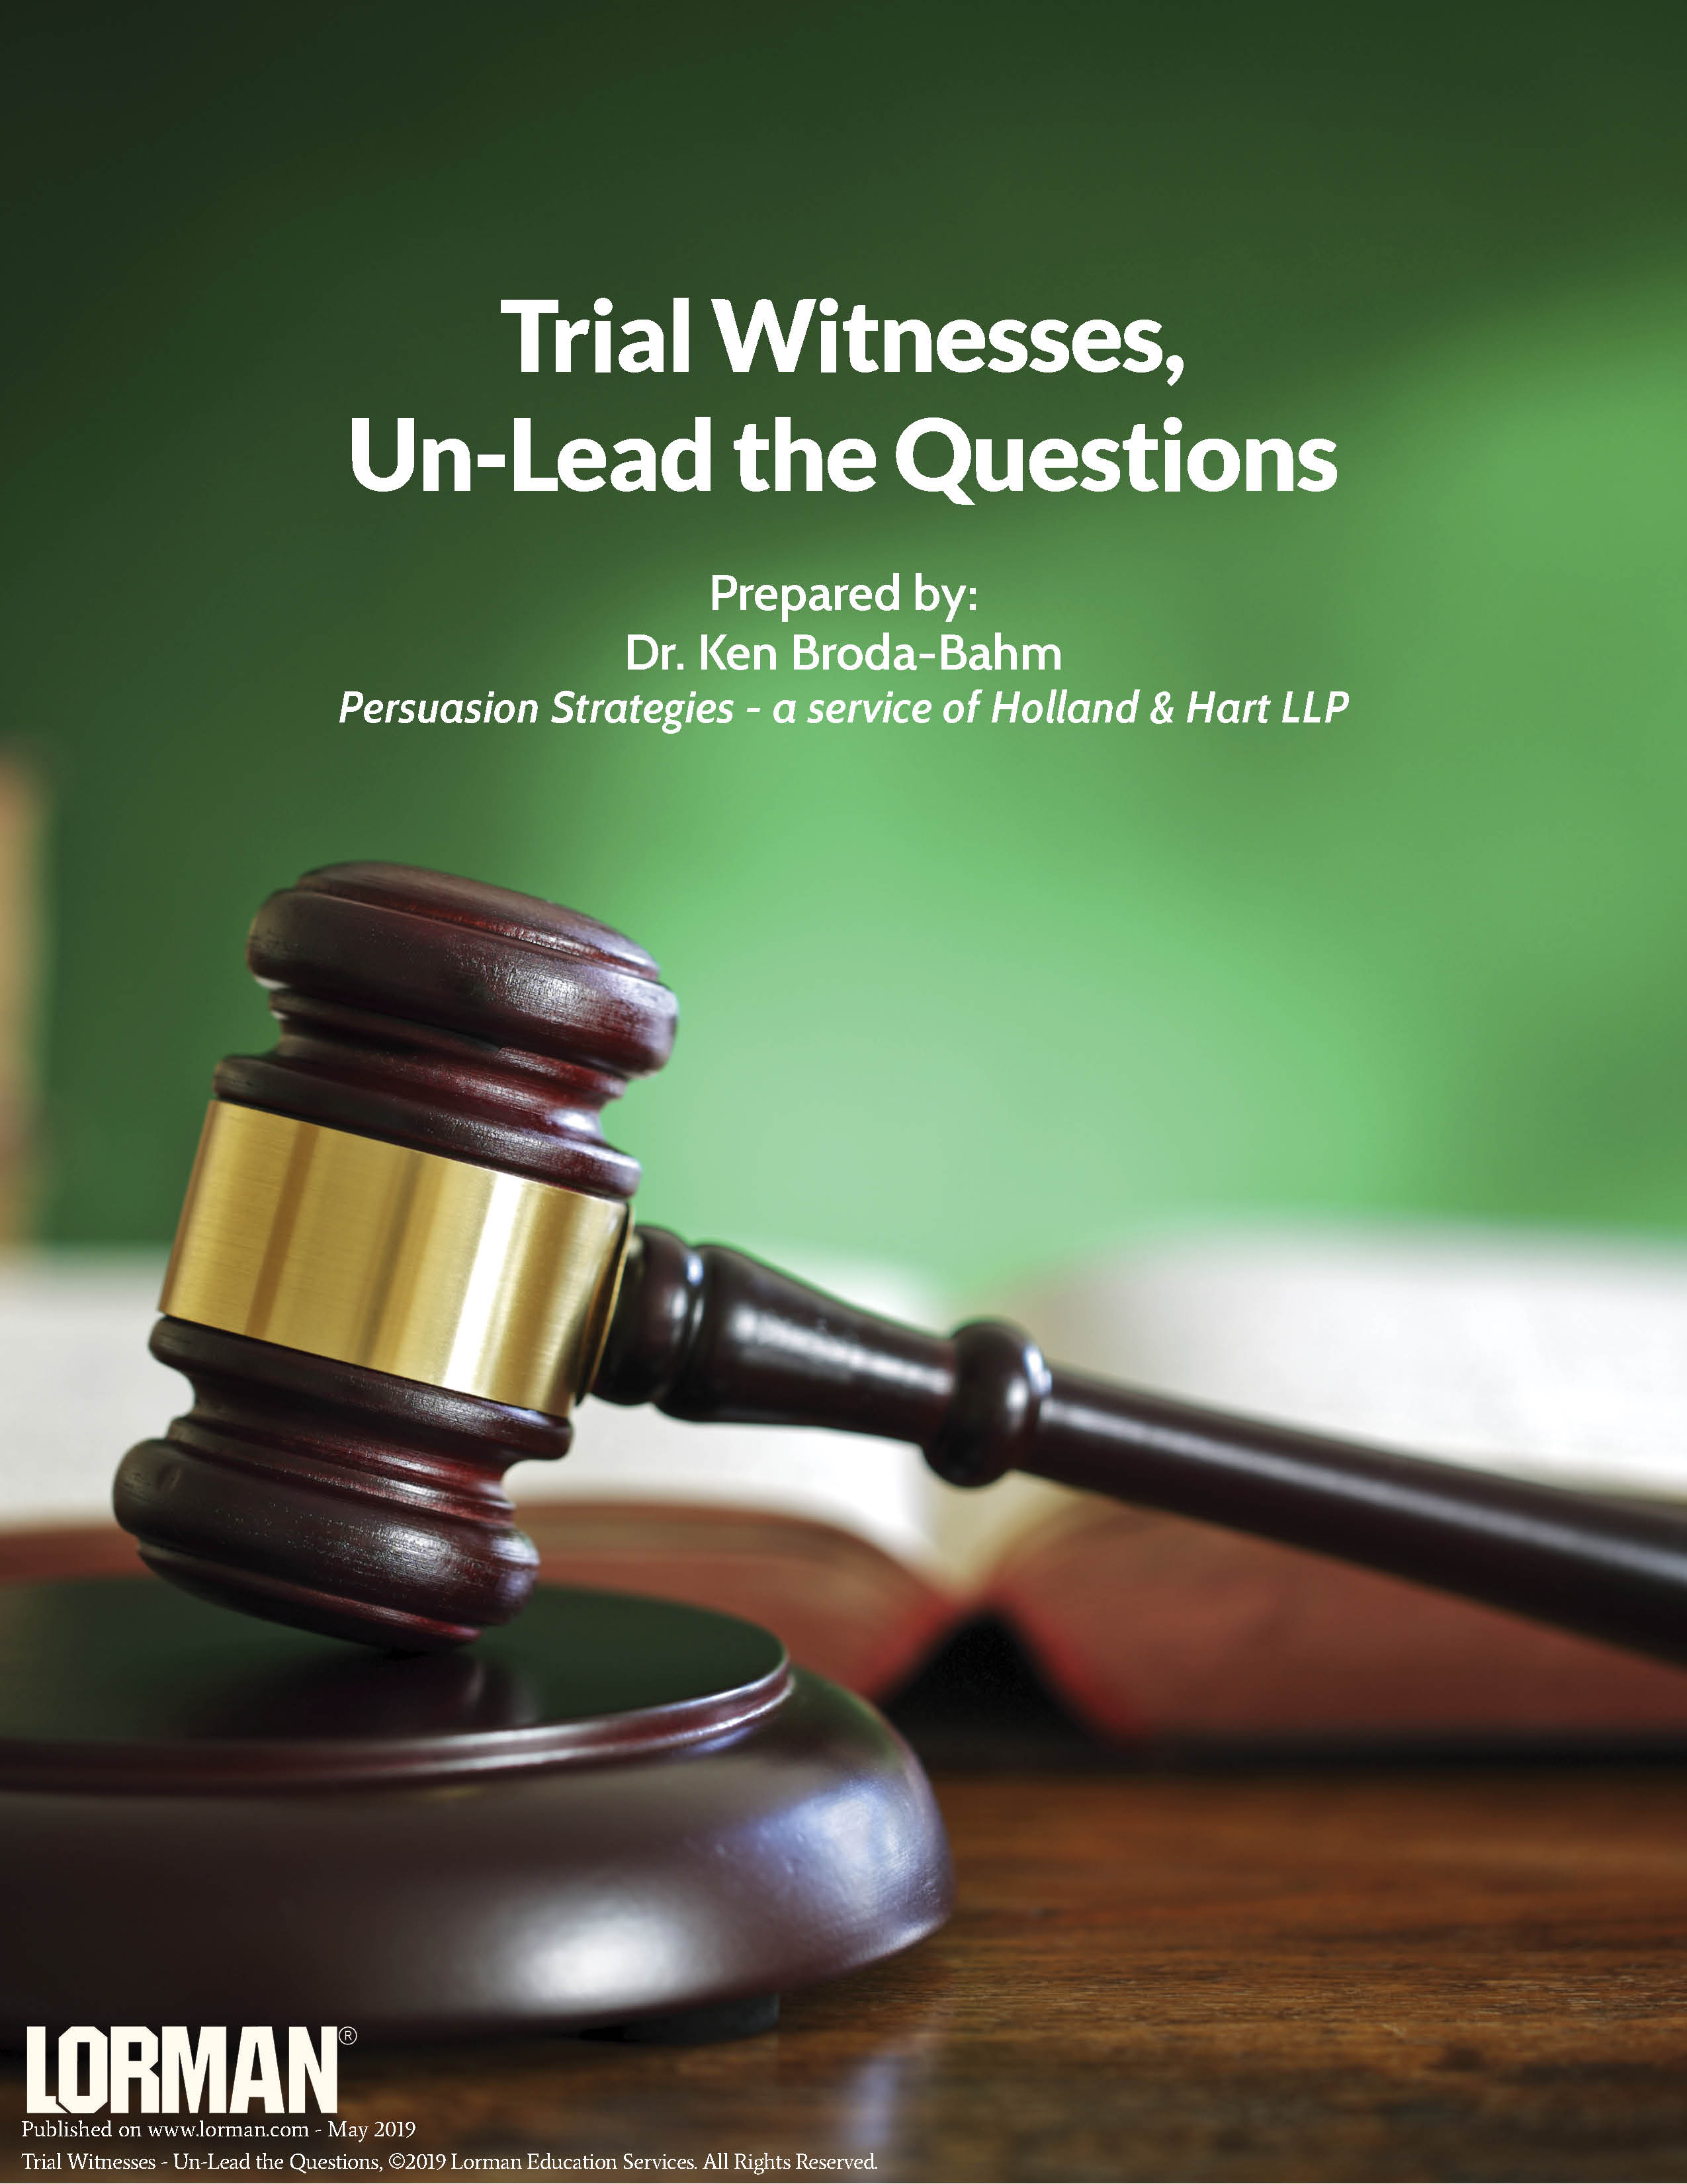 Trial Witnesses - Un-Lead the Questions